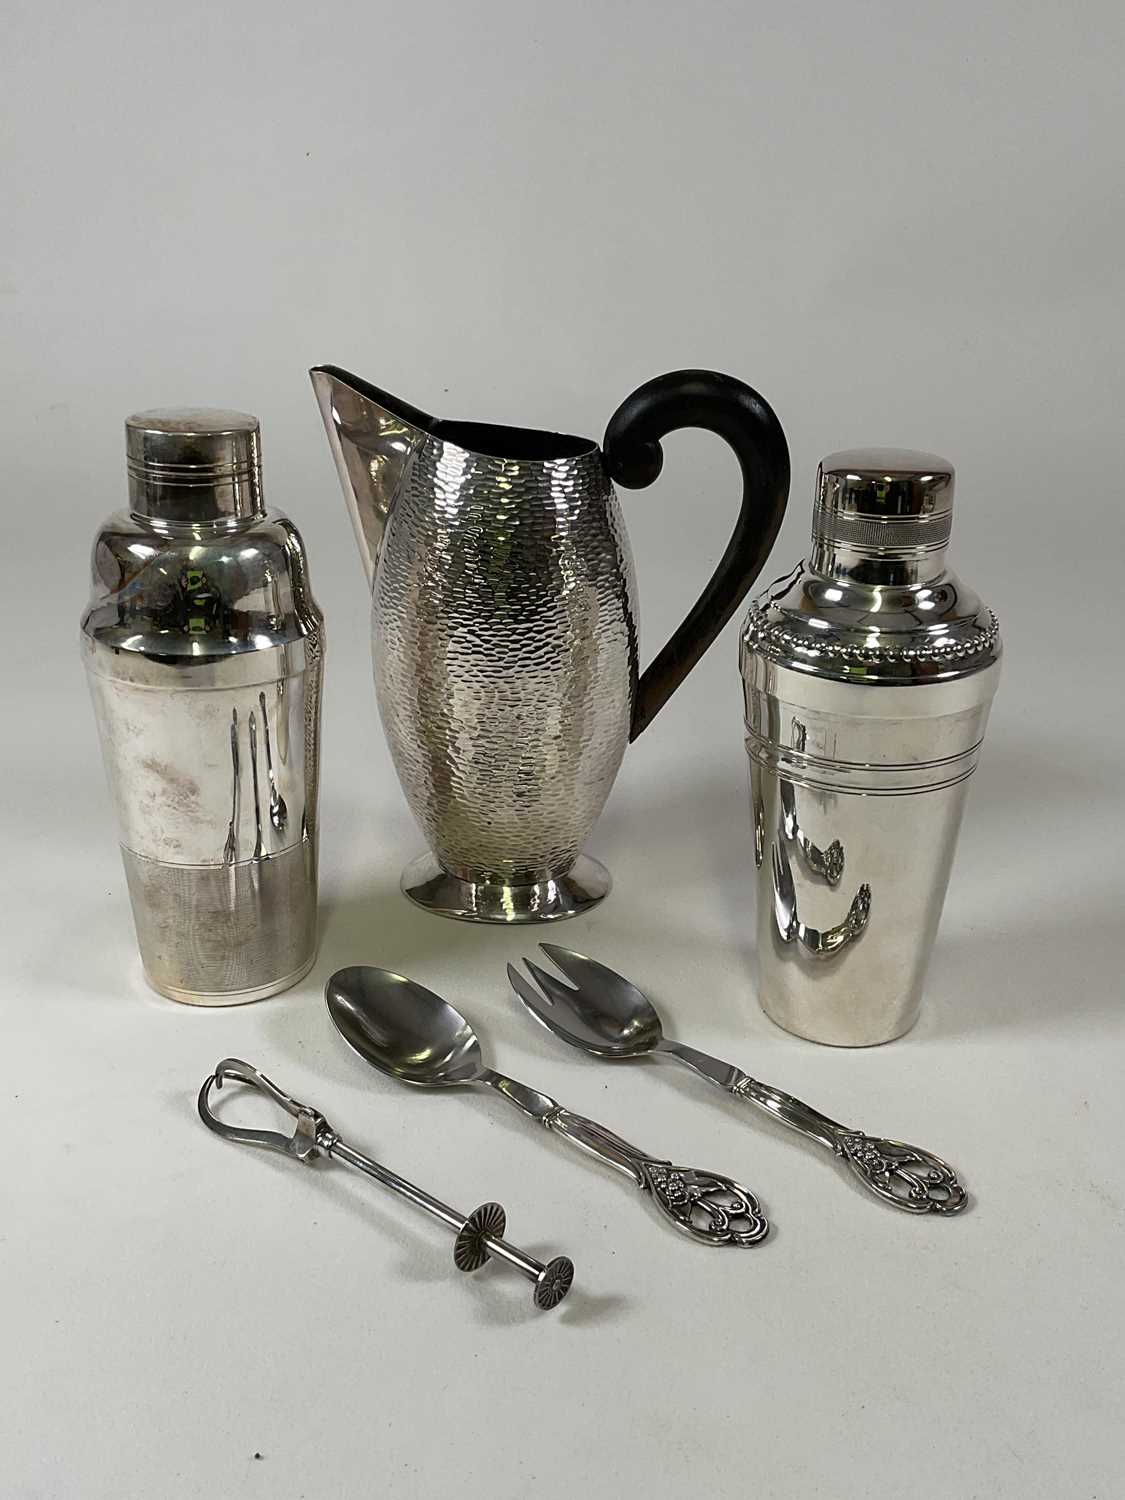 Two silver plated cocktail shakers, a stylish silver plated jug with ebonised handle and textured